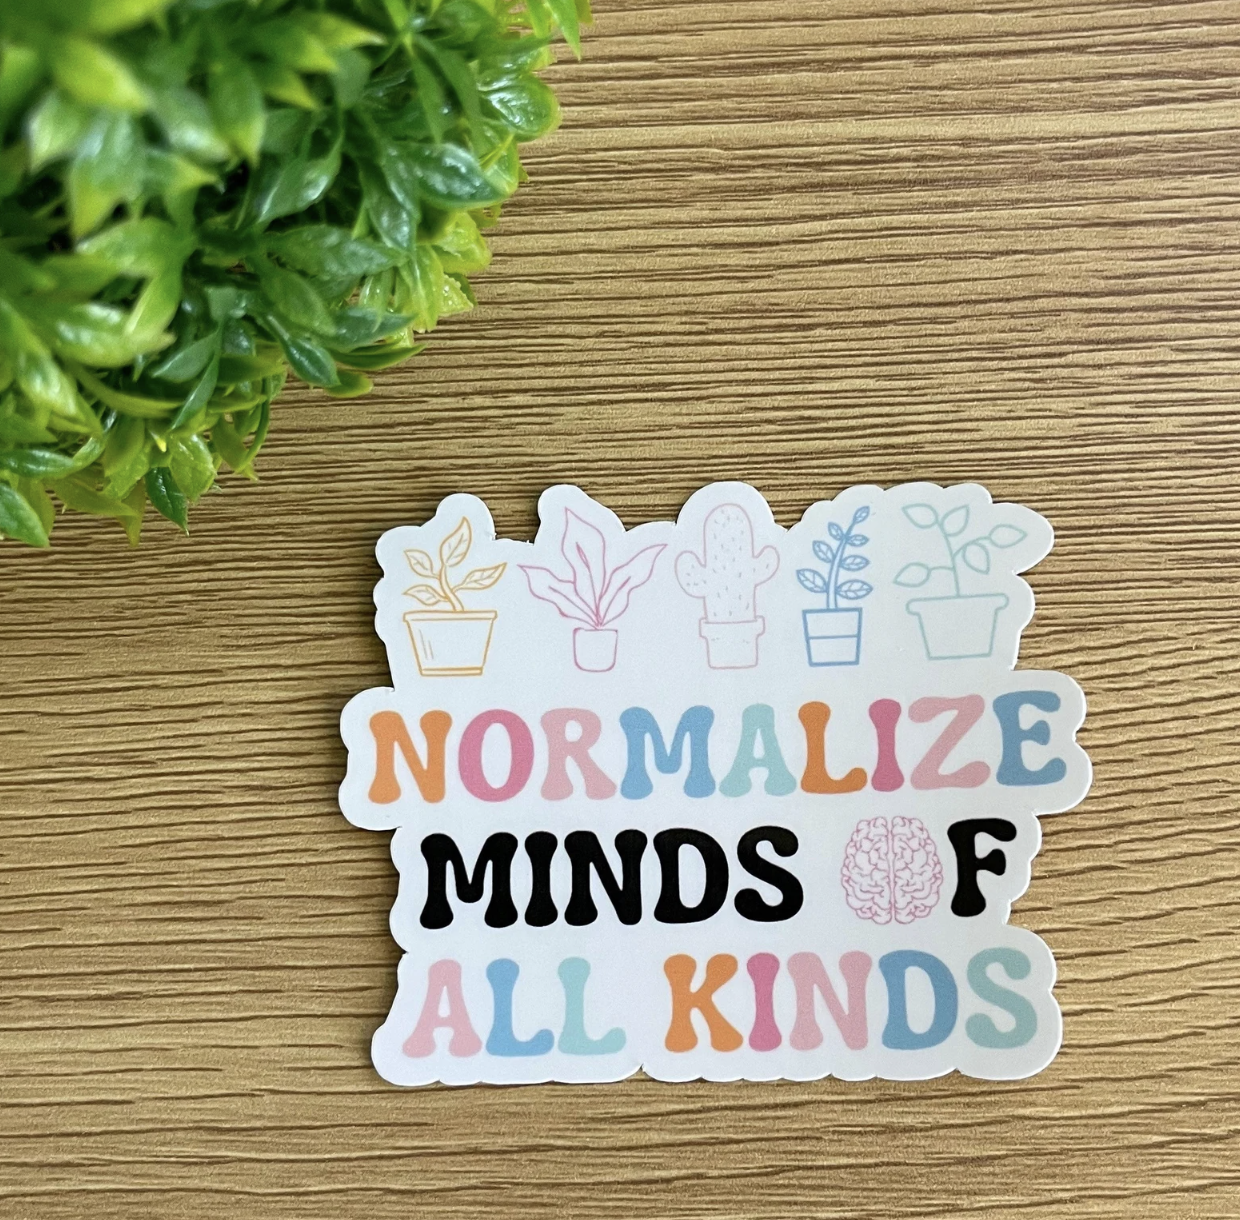 Sticker #125 | Normalize Minds of all Kinds Sticker | Laptop & Water Bottle Sticker Decal